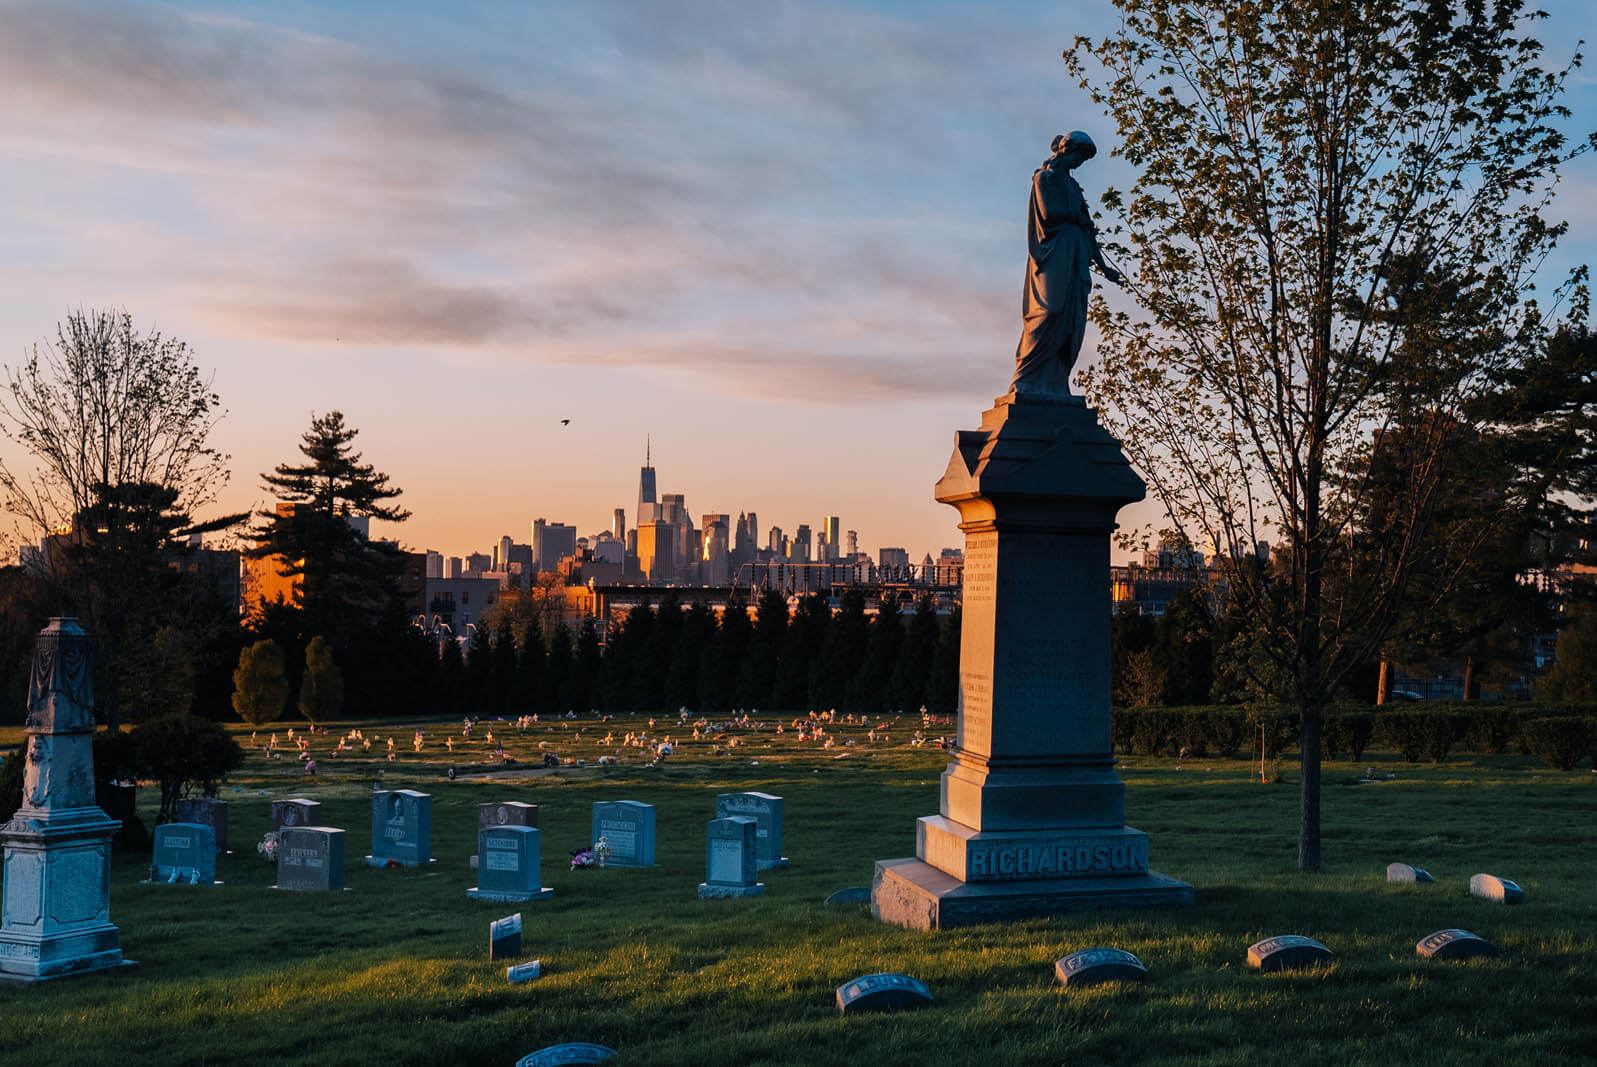 Green-Wood Cemetery at sunset in Sunset Park Brooklyn